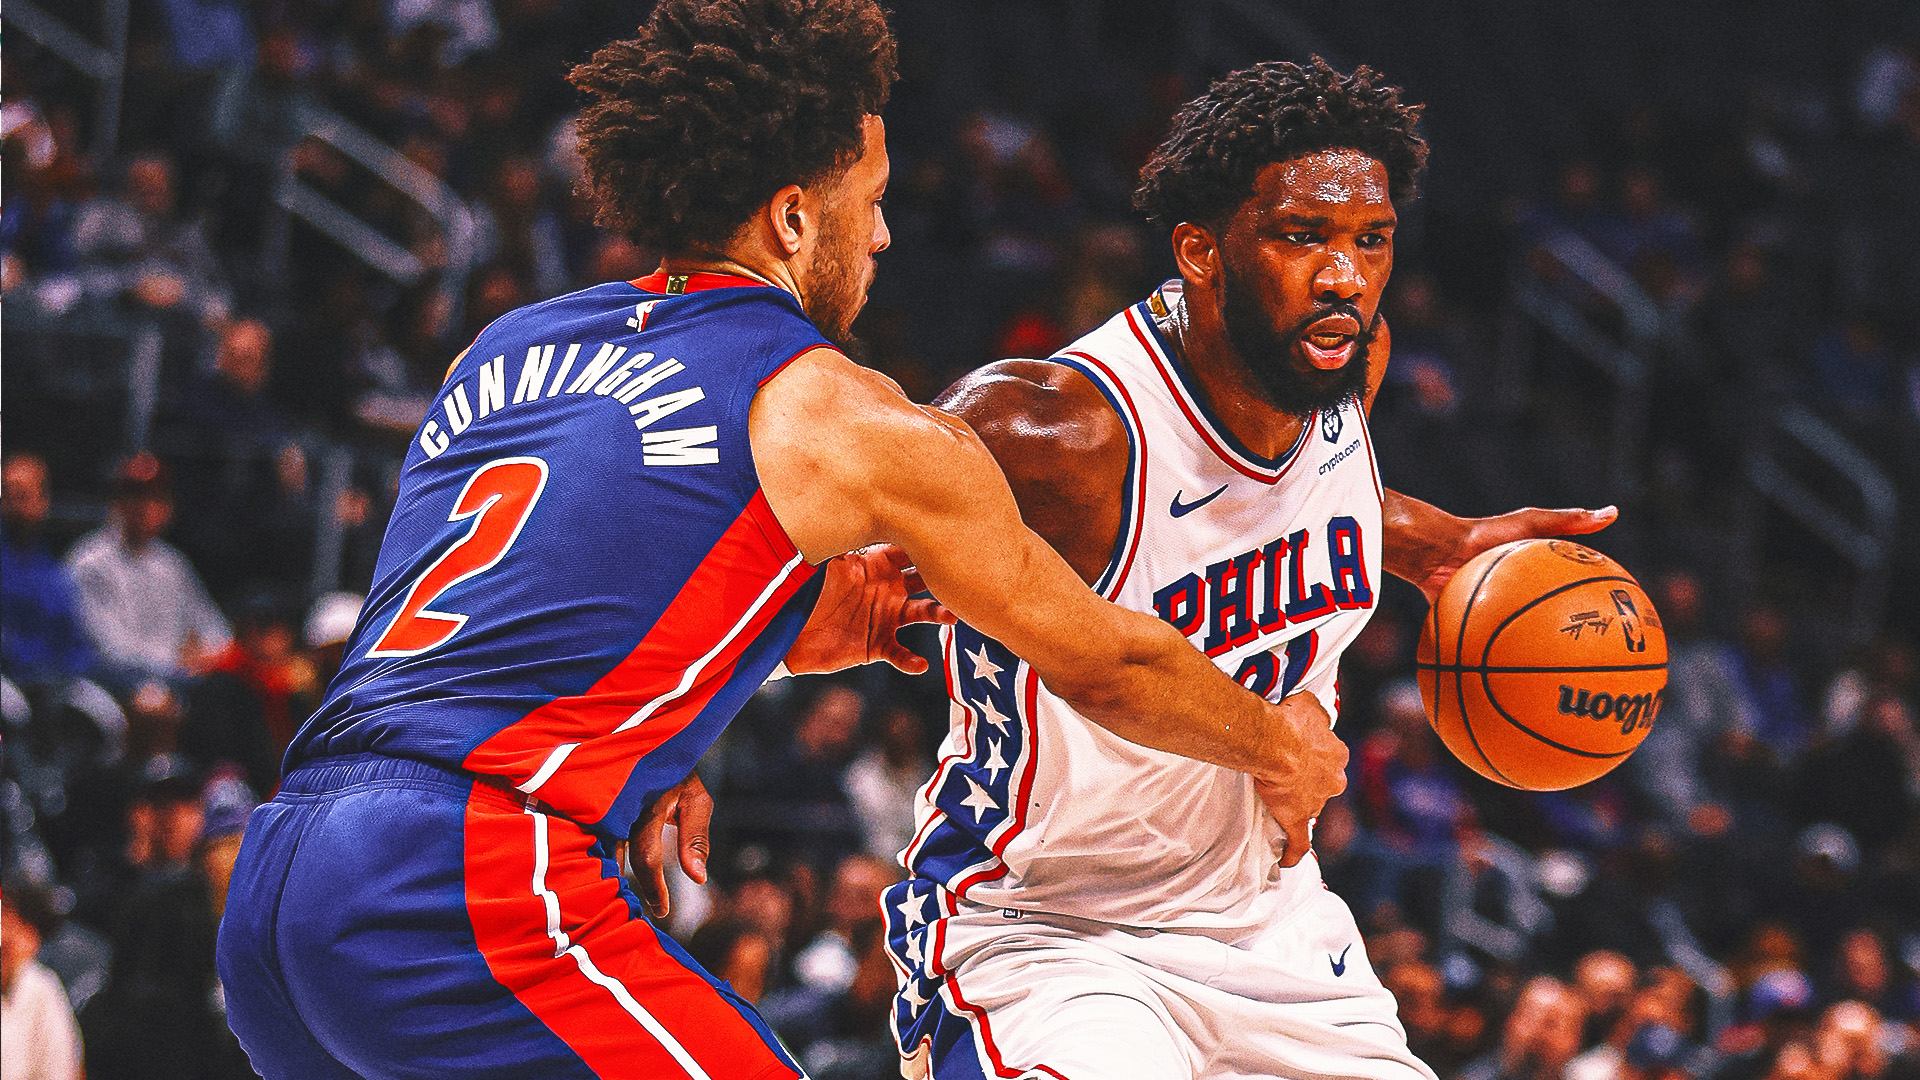 Joel Embiid scores 41 points as 76ers hand Pistons 21st straight loss